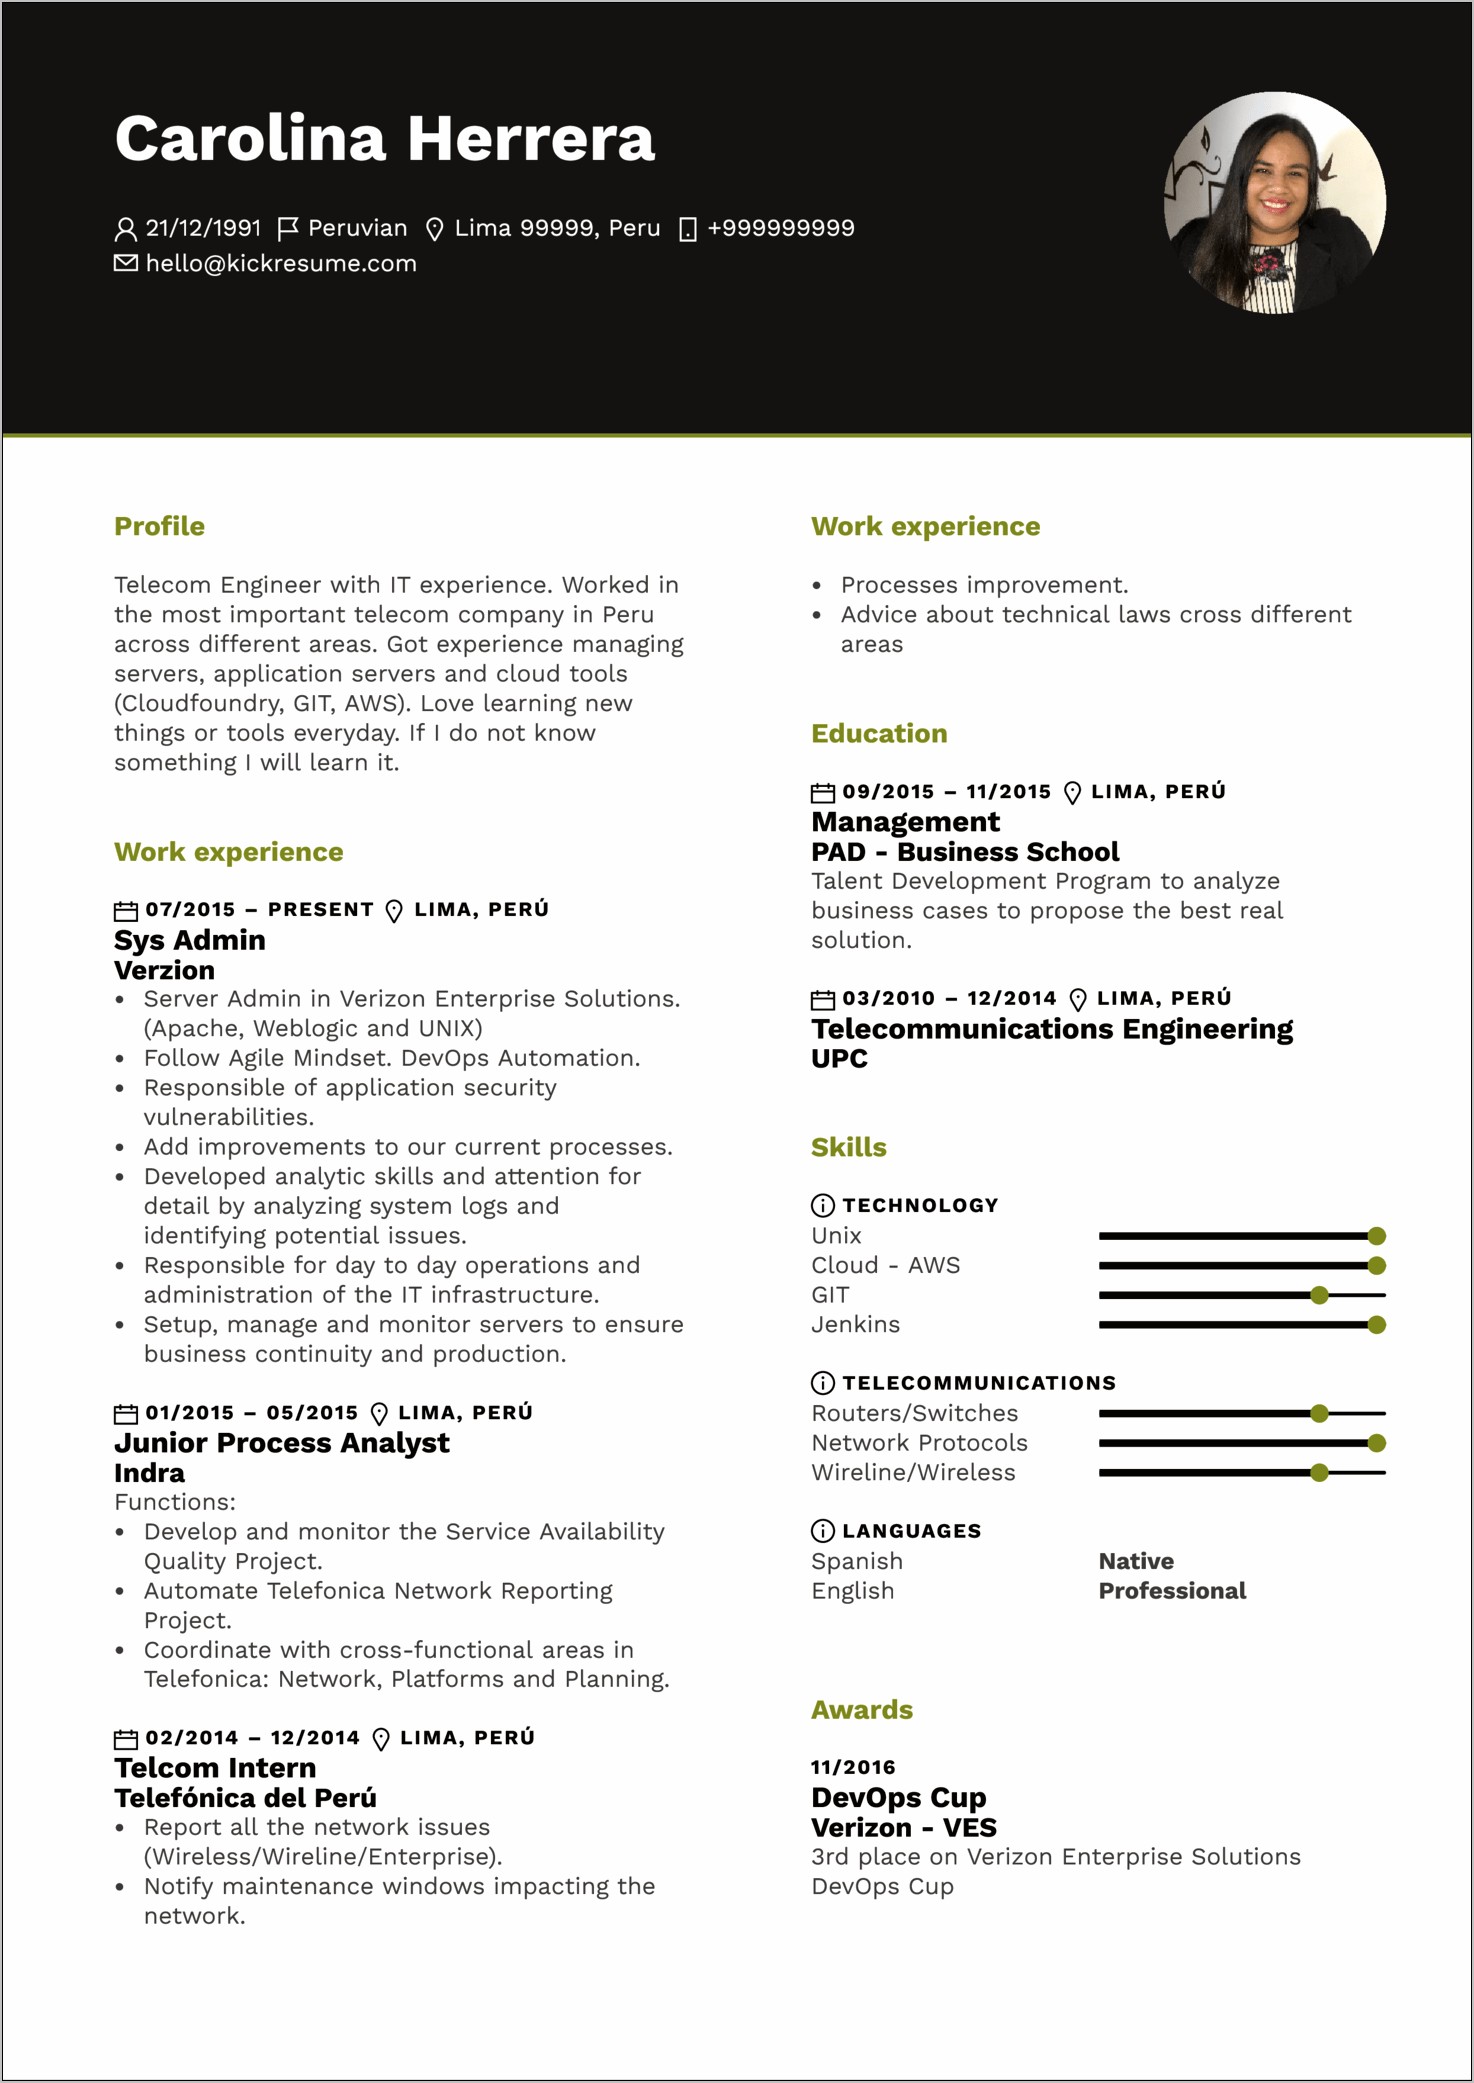 Resume Objective For New Applicant